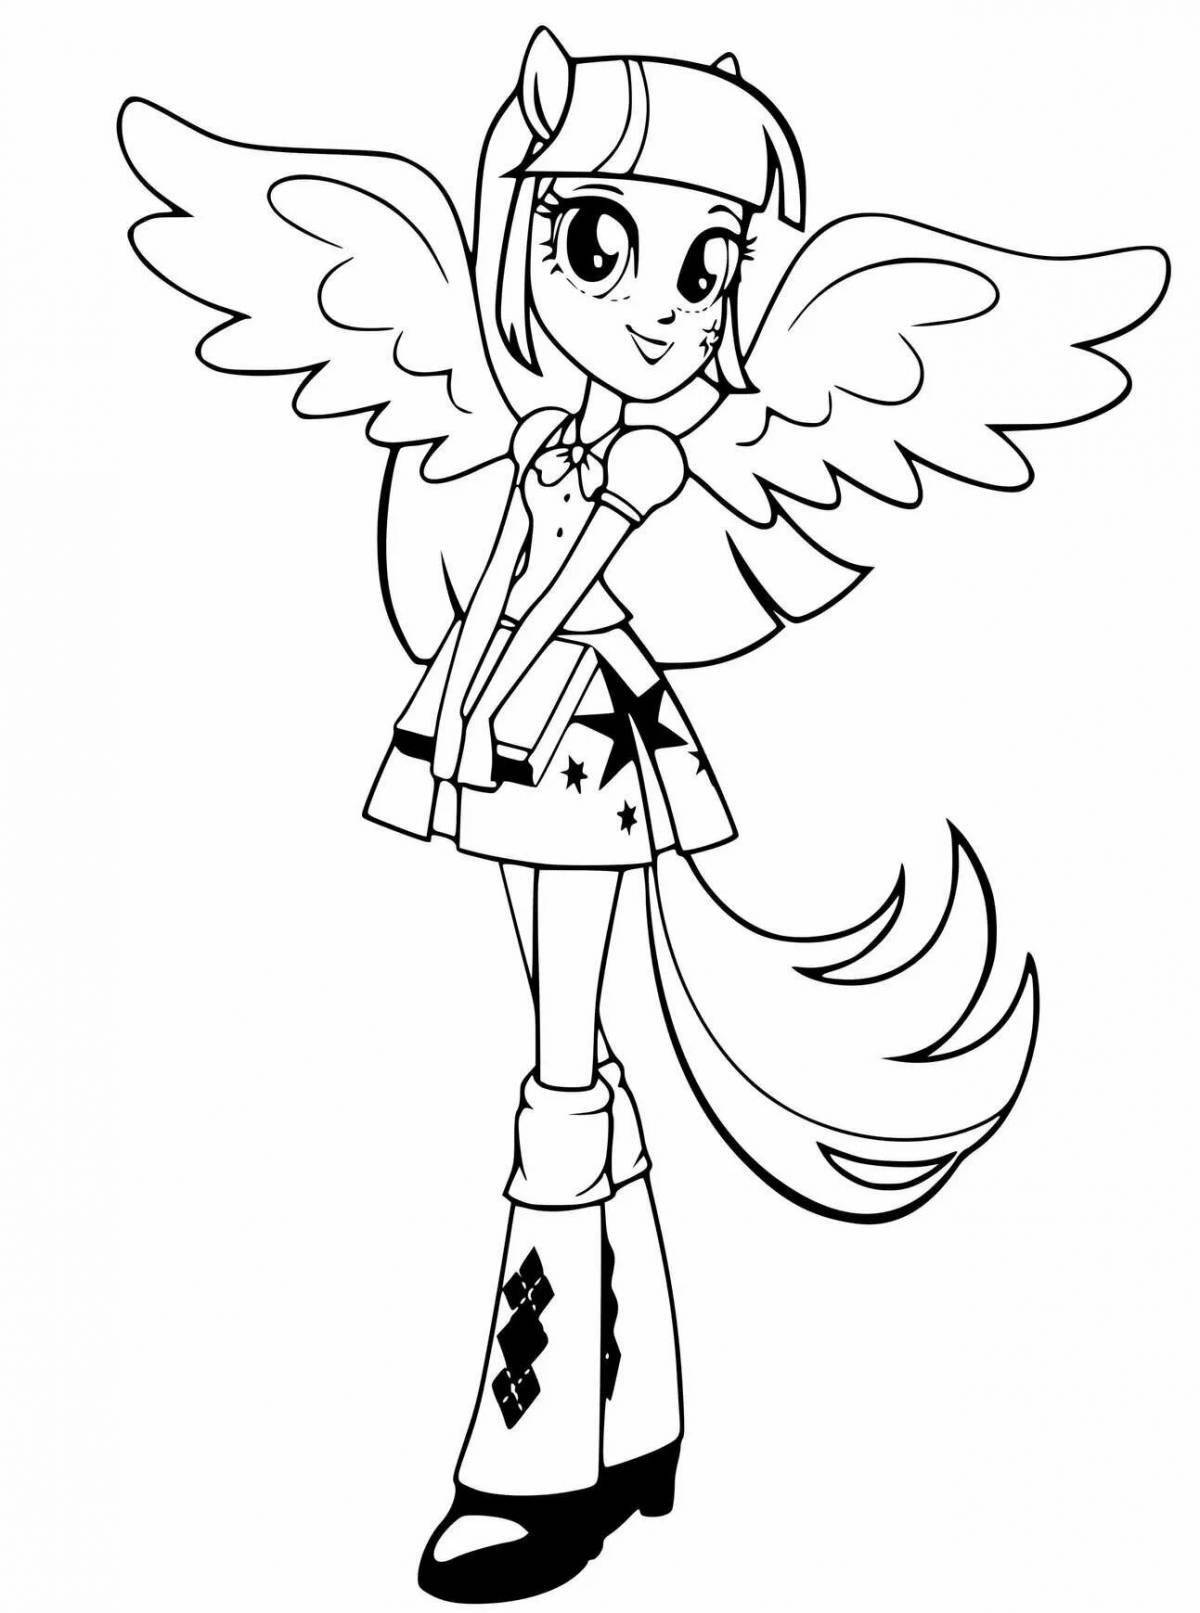 Animated equestria girls coloring pages